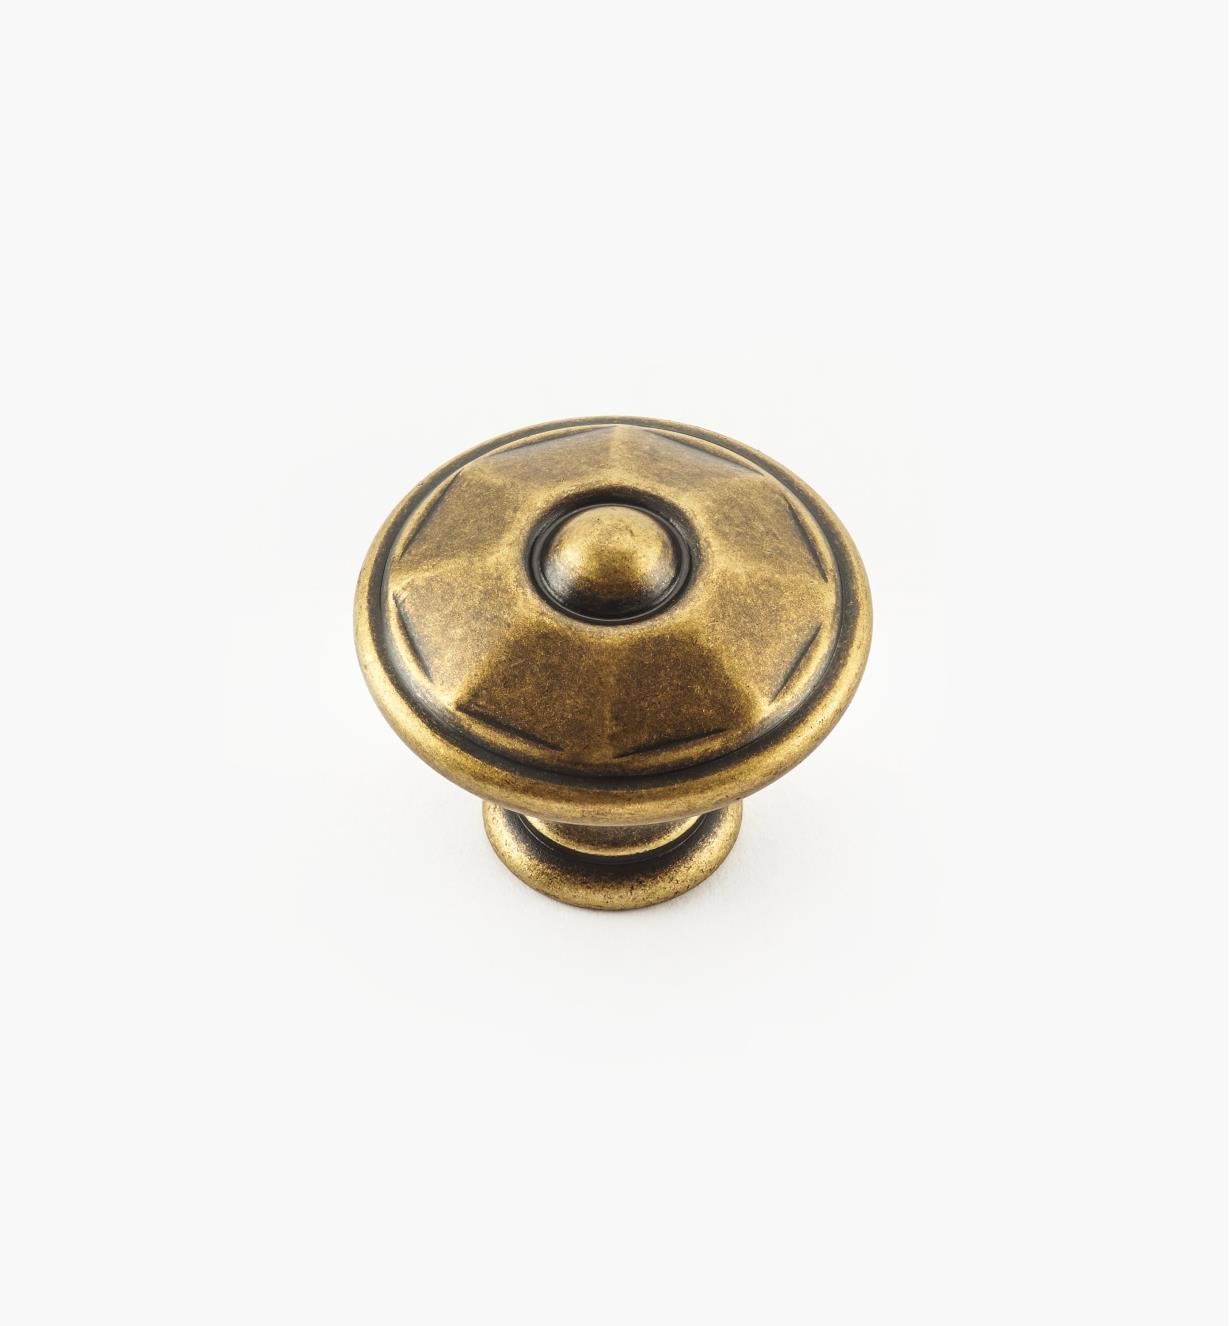 01A2241 - Faceted Brass Knob, 30mm × 26mm